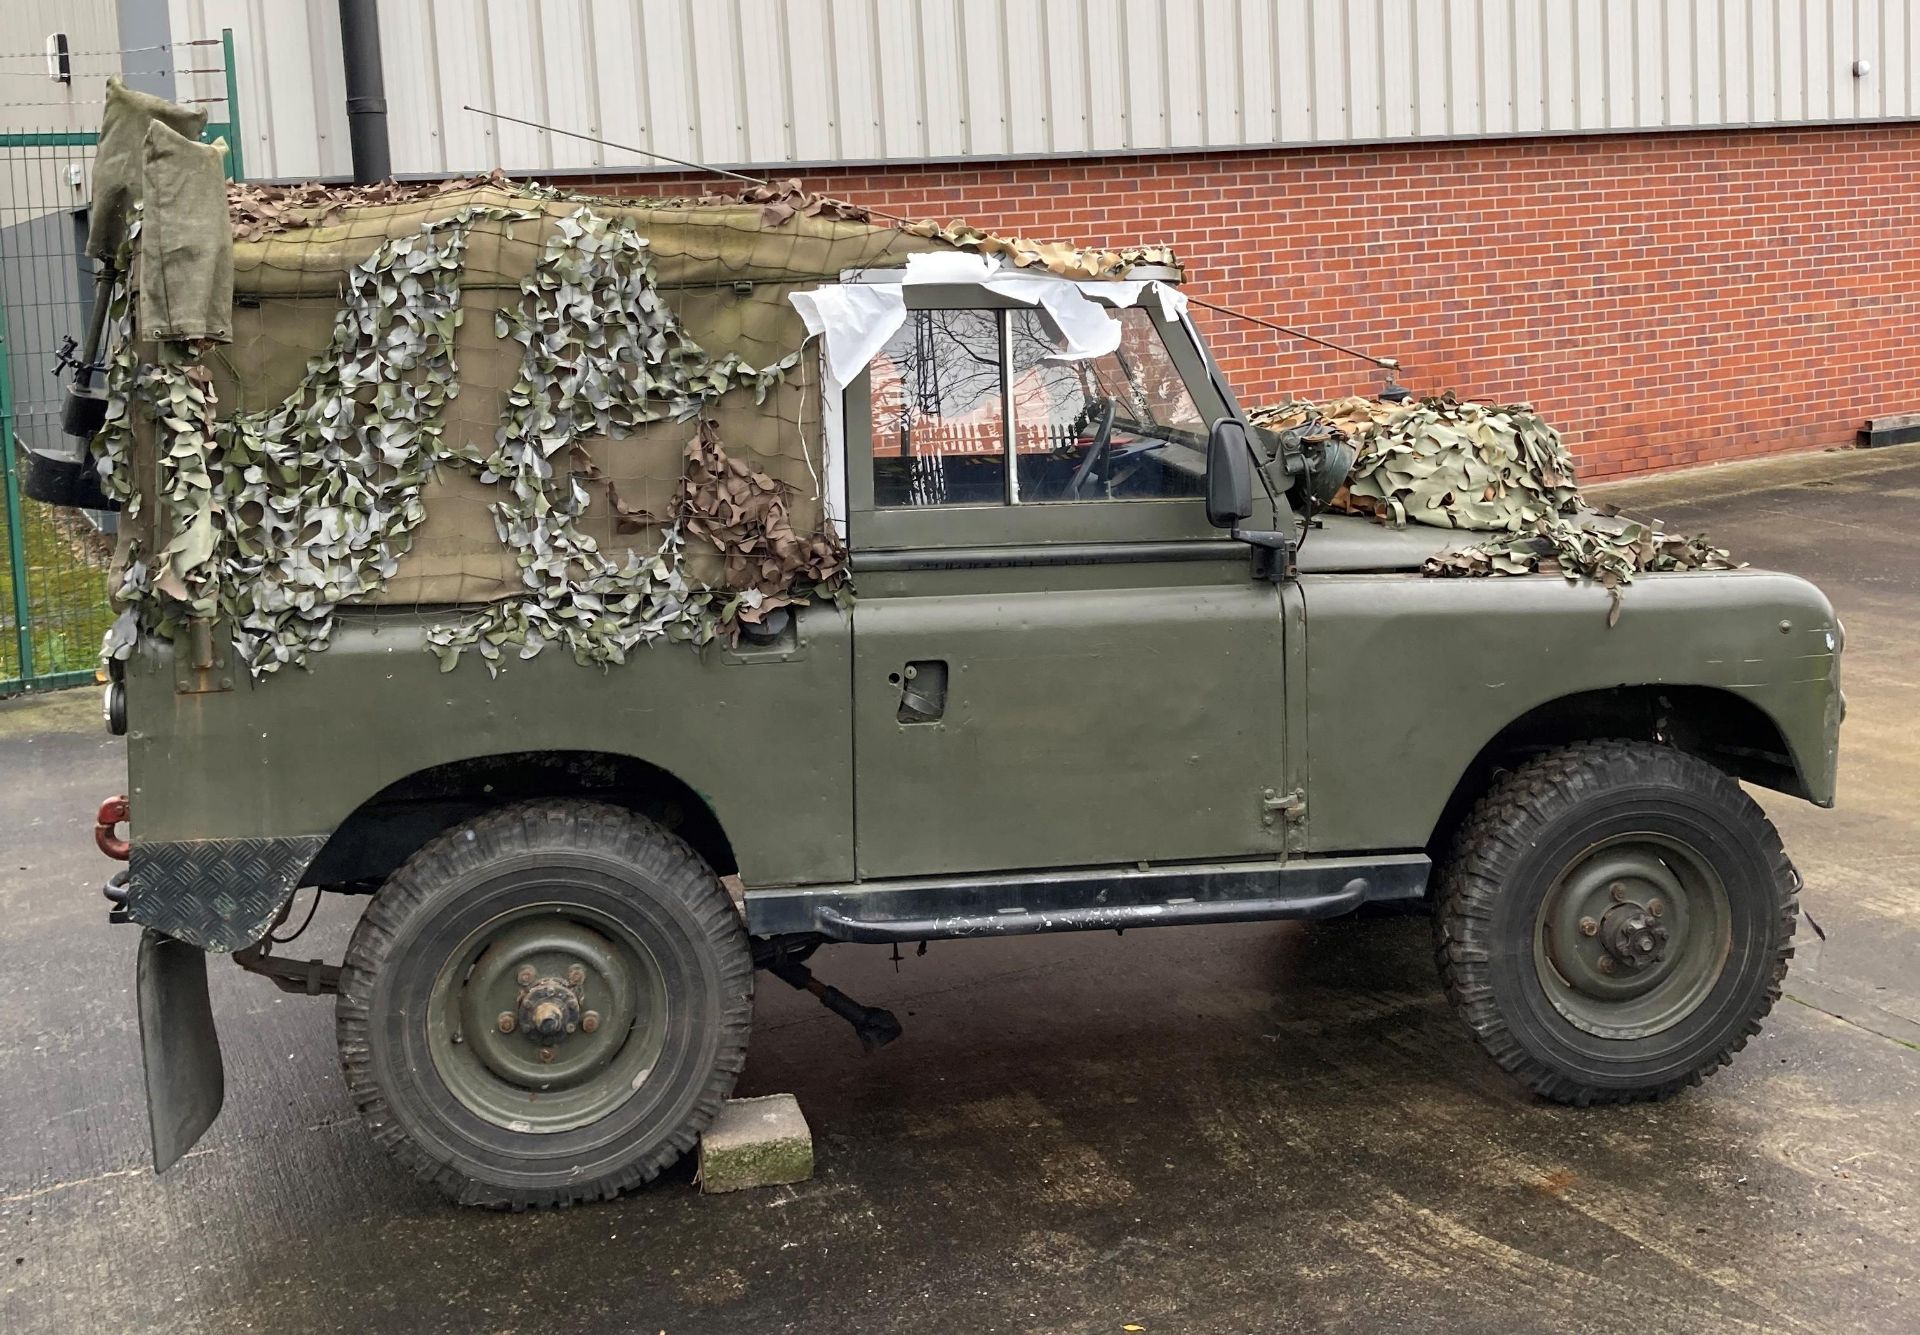 LAND ROVER LIGHT 4X4 UTILITY 2500cc - Diesel - Camouflage. - Image 5 of 9